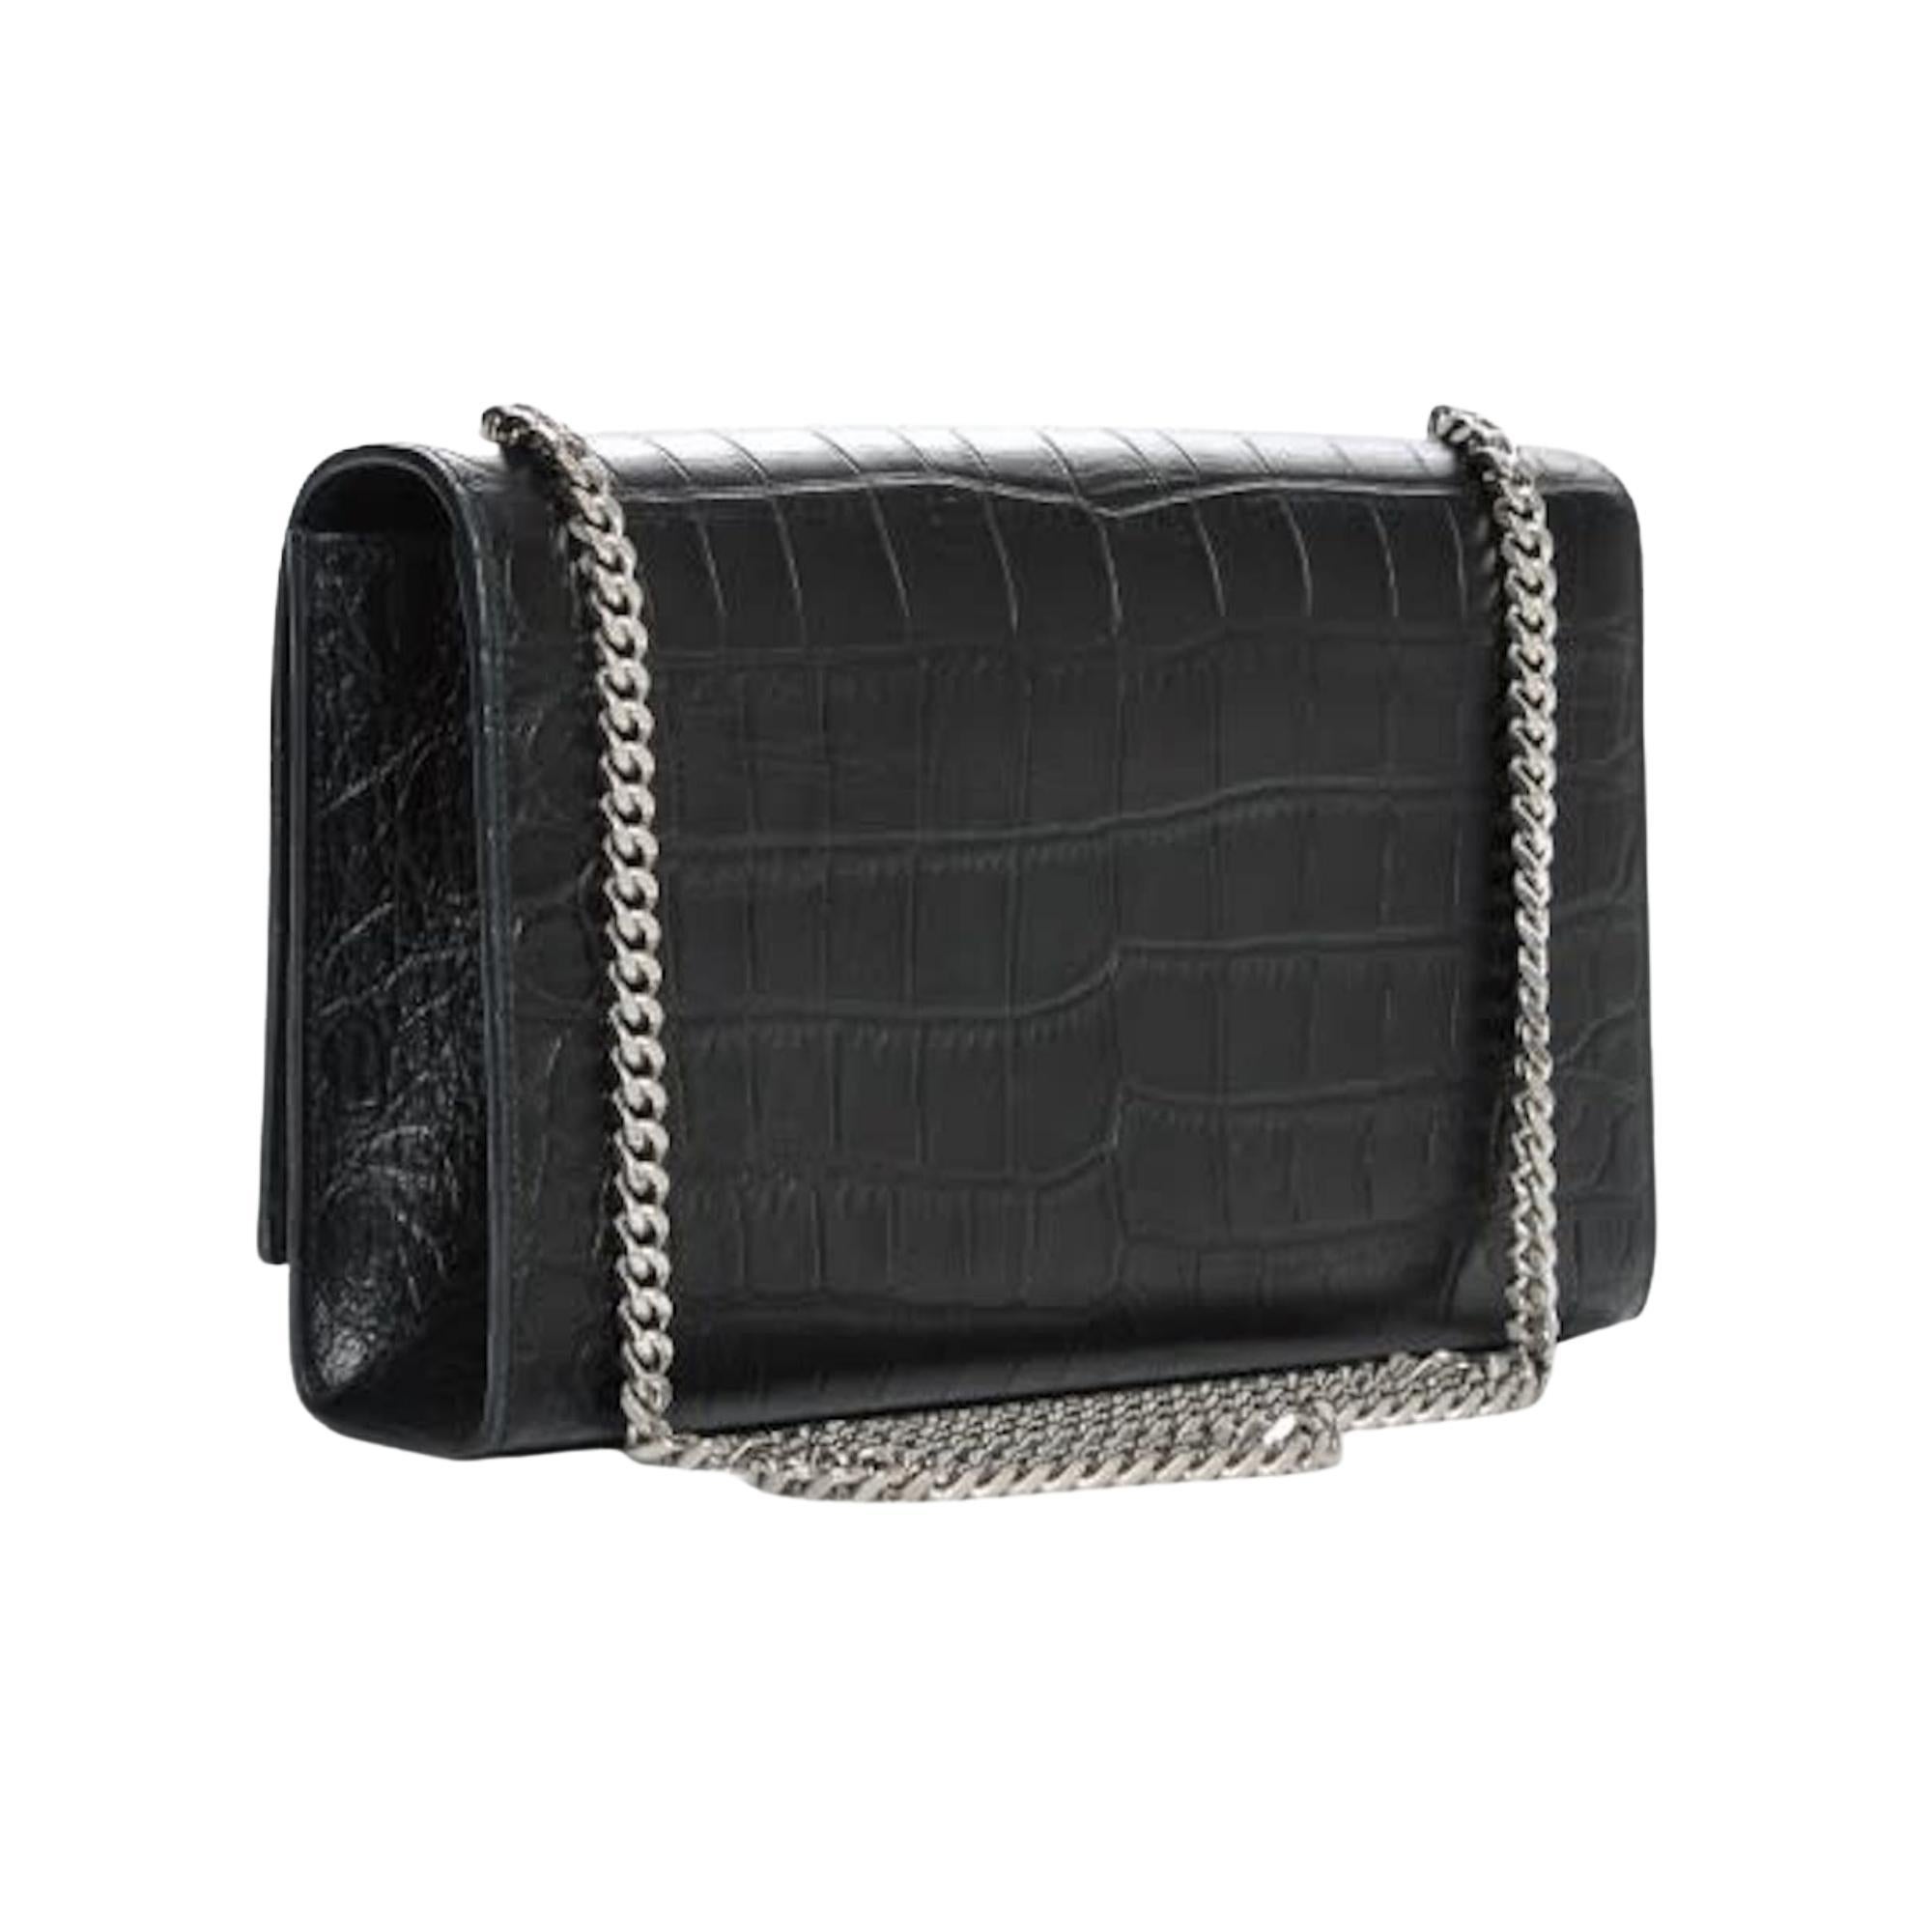 This shoulder is made of crocodile embossed calfskin in black and features an aged silver chain shoulder strap, a front flap, an aged silver YSL logo, a chain tassel and leather interior lining.

COLOR: Black
MATERIAL: Croc embossed calfskin
ITEM